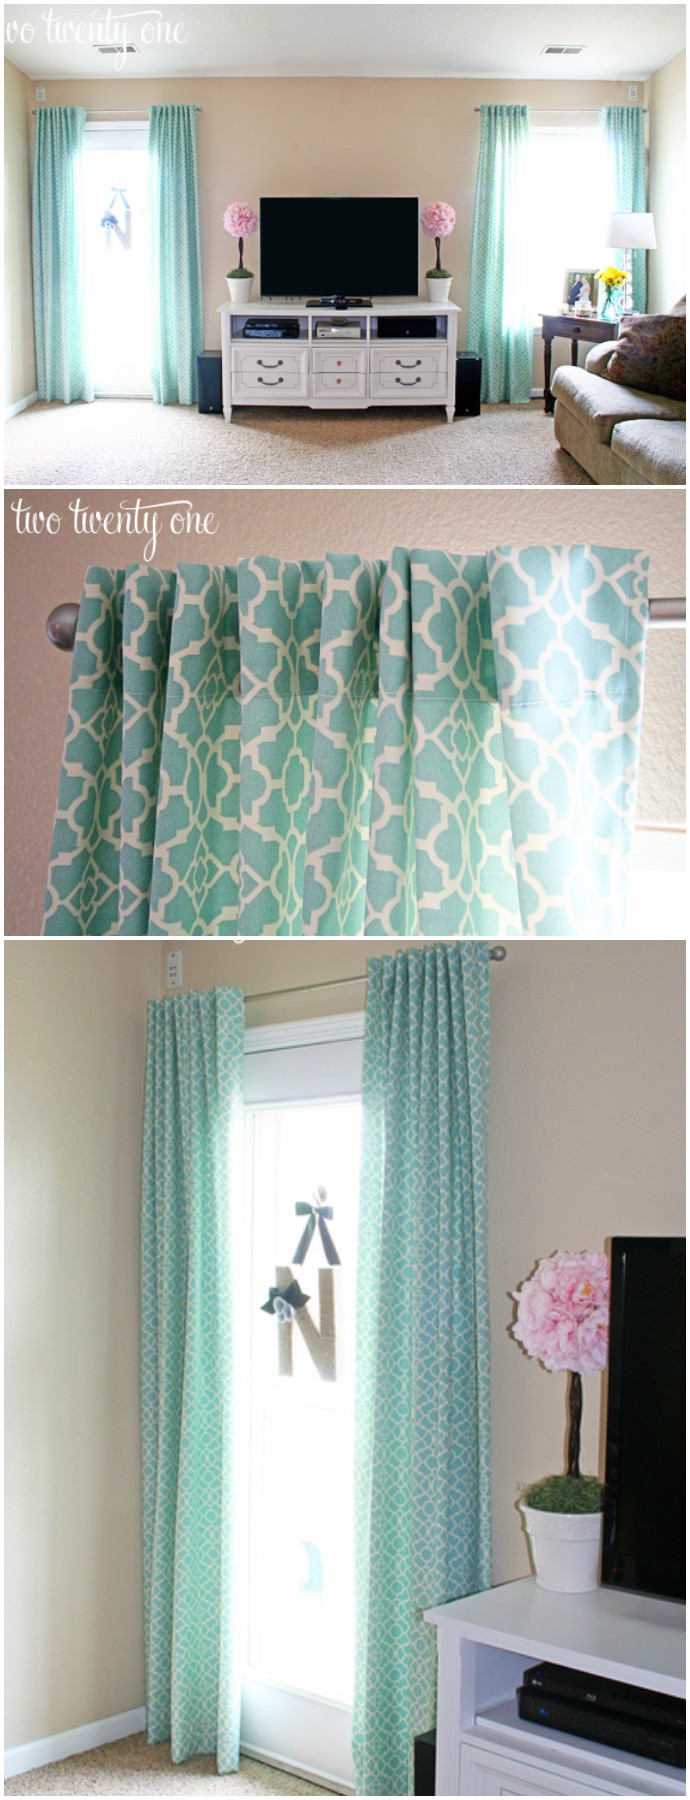 How To Make Curtains